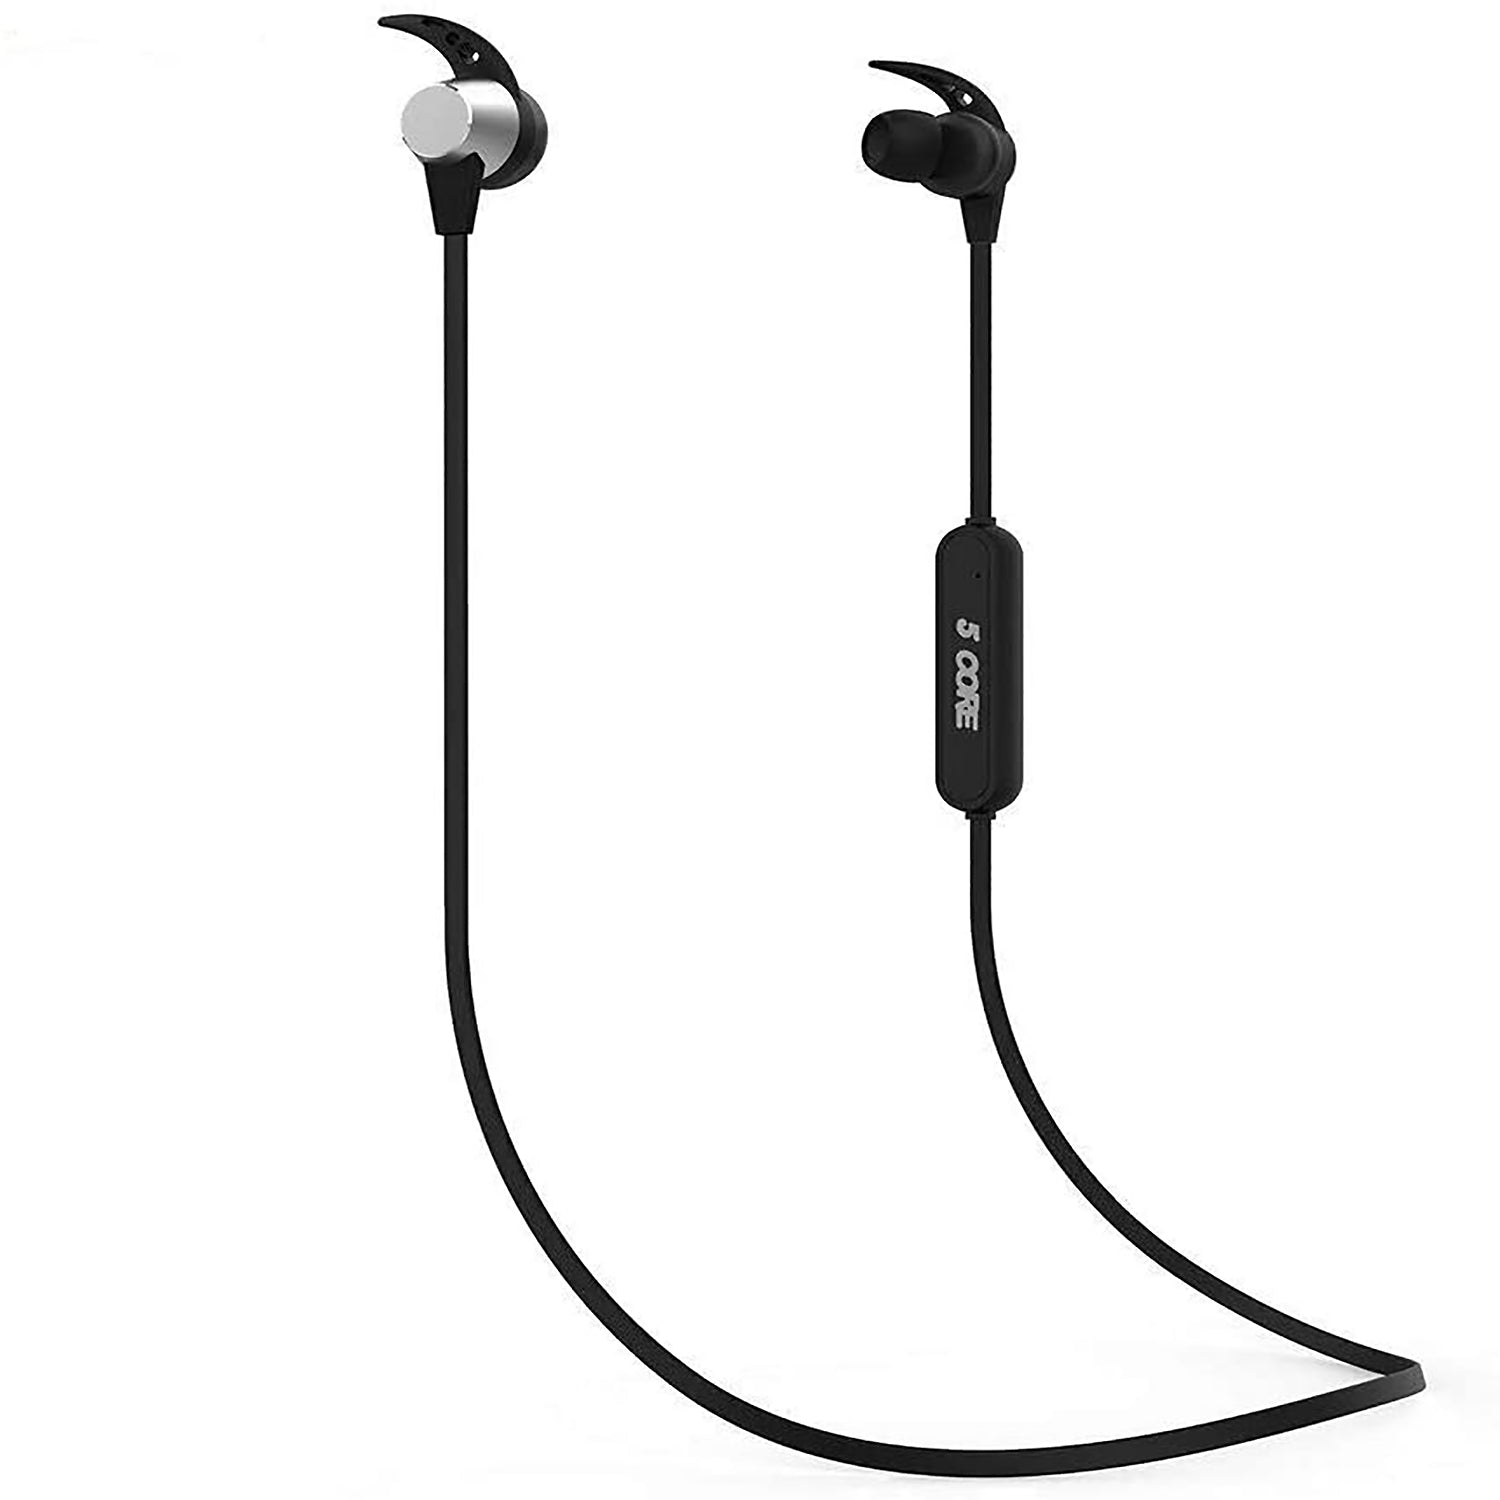 5 Core Wireless Bluetooth Headphones 12H Playtime • Wireless Neckband Earbuds w Mic for Calls